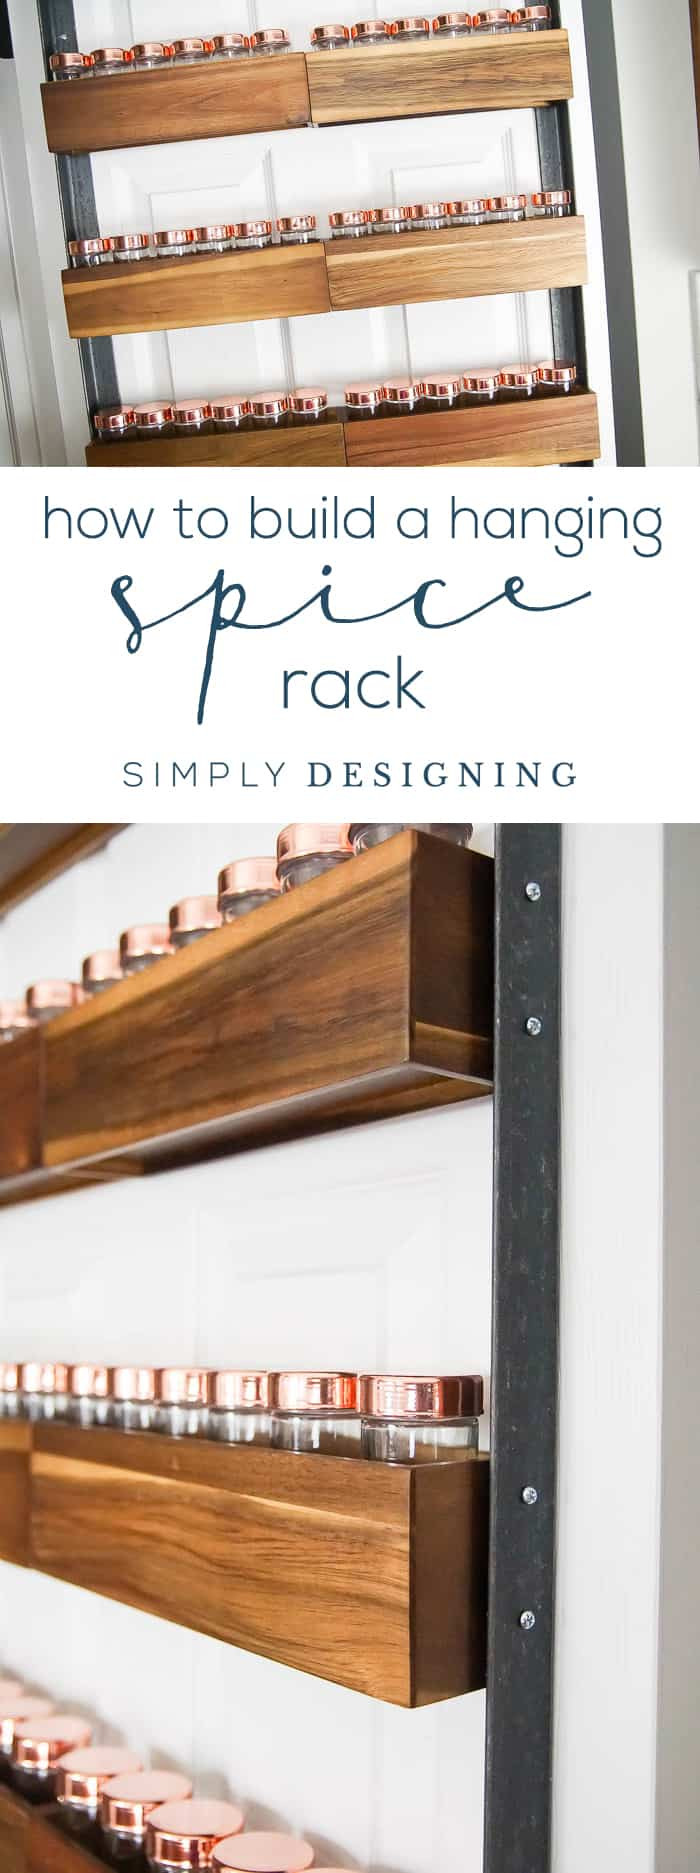 DIY Pantry Door Spice Rack
 How to Build a DIY Spice Rack that can Hang on your Pantry